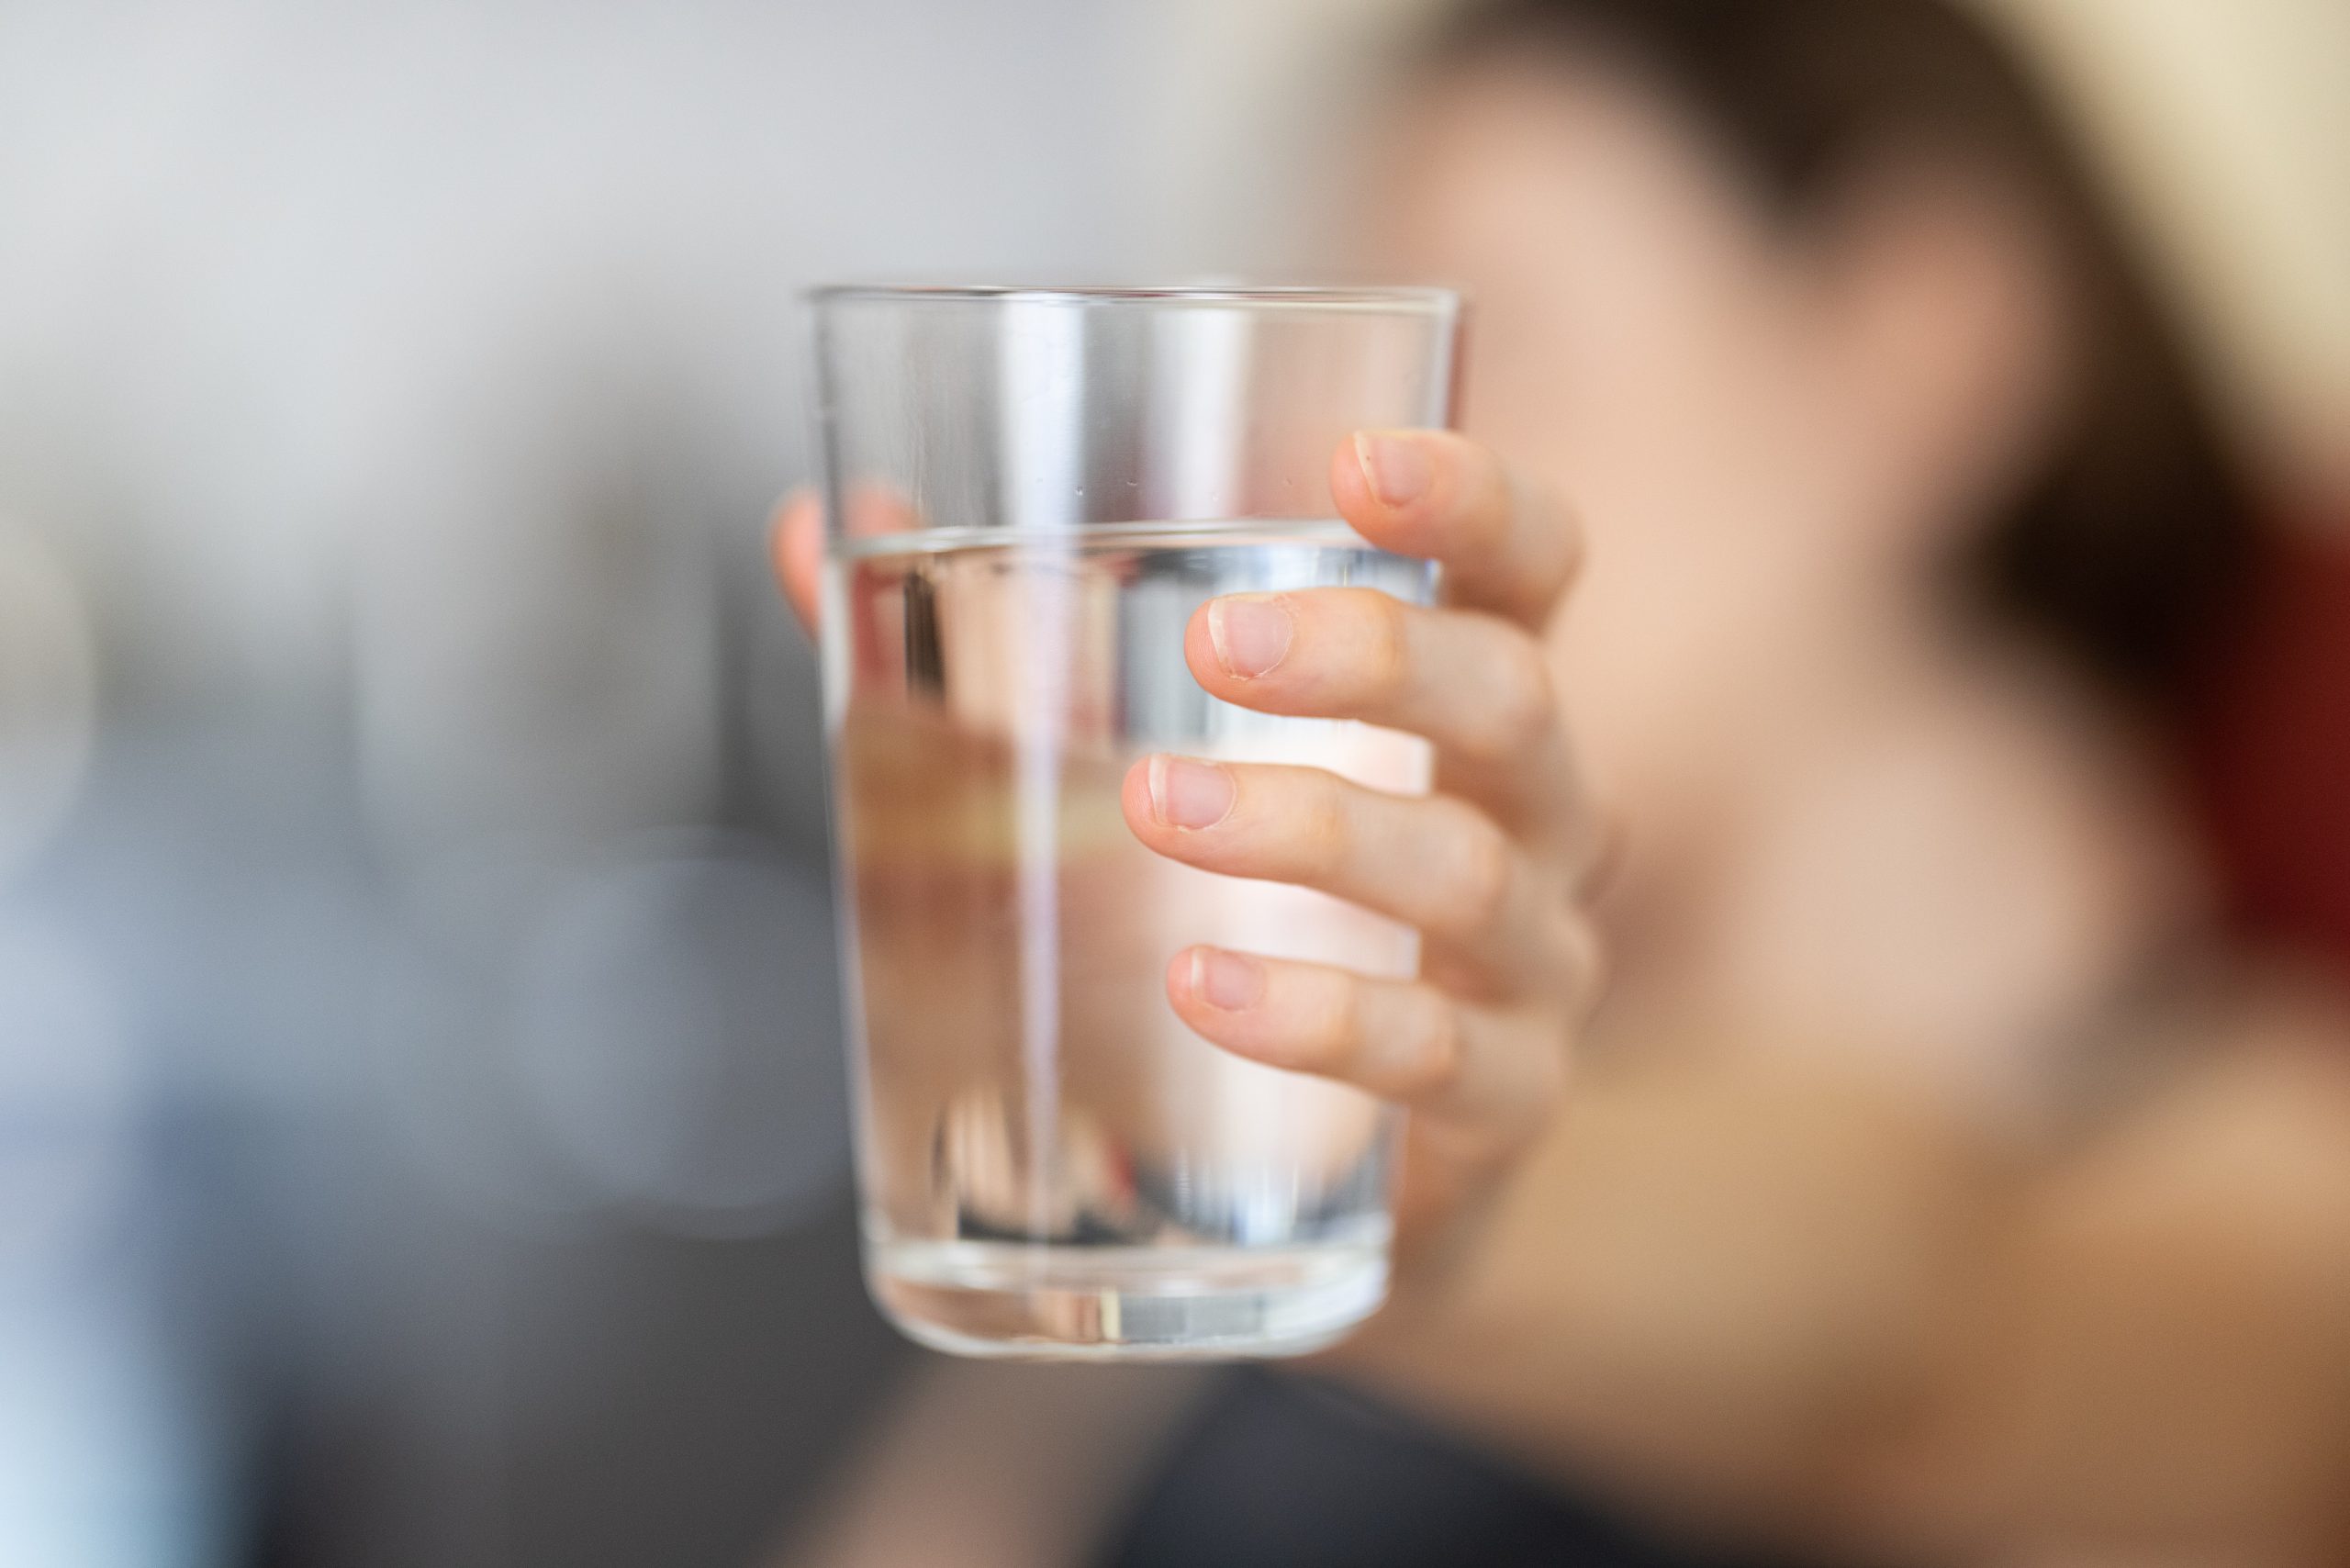 A person holds a glass of water